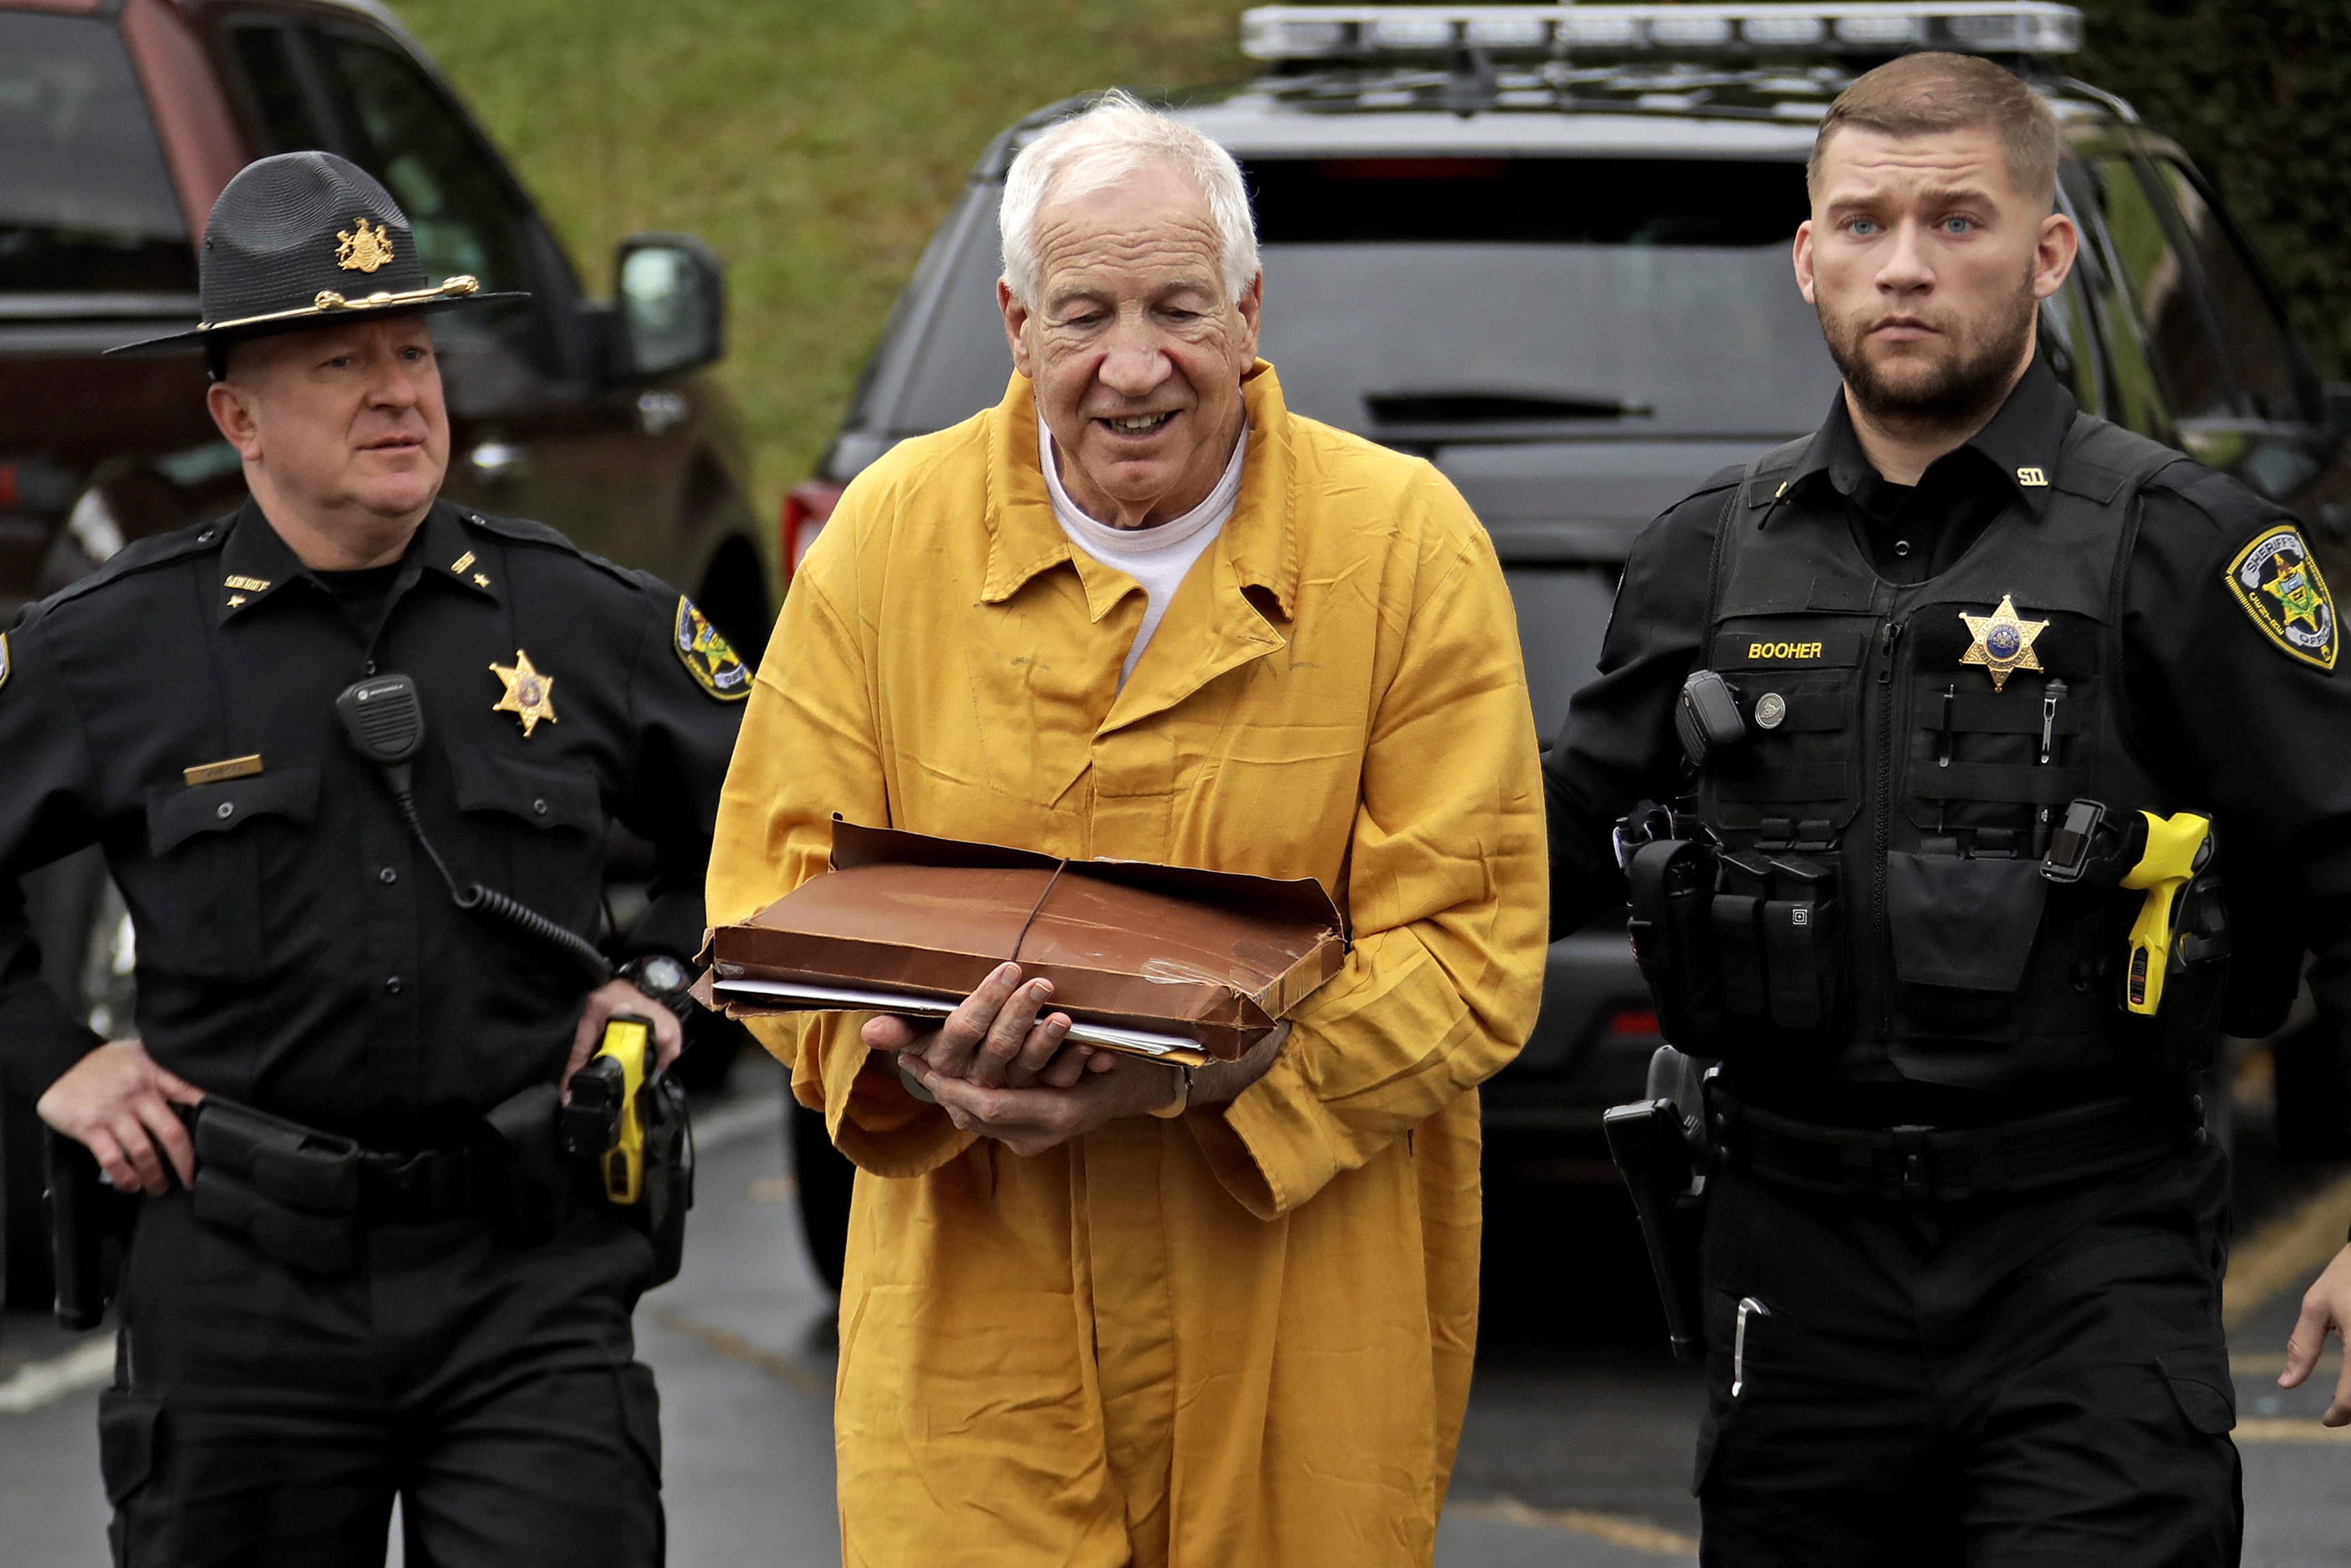 Ex-Penn State coach Sandusky loses bid for shorter prison term,  re-sentenced to 30-60 years - National 